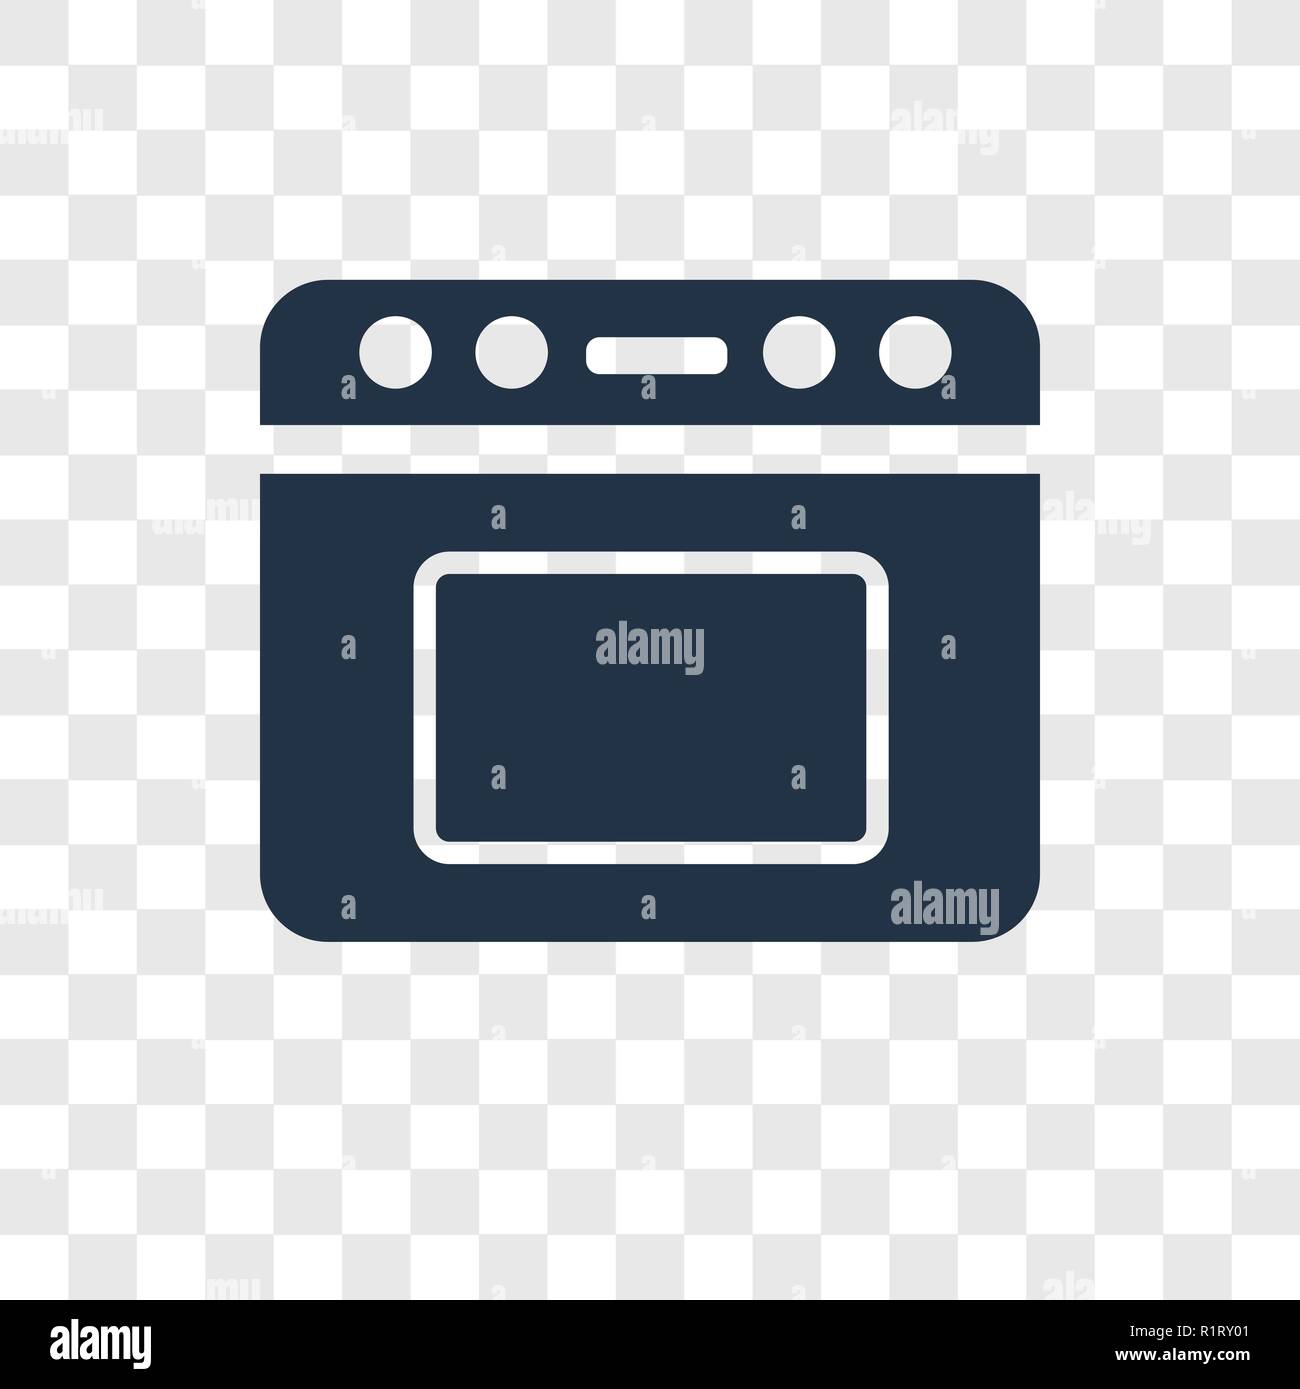 https://c8.alamy.com/comp/R1RY01/oven-vector-icon-isolated-on-transparent-background-oven-transparency-logo-concept-R1RY01.jpg